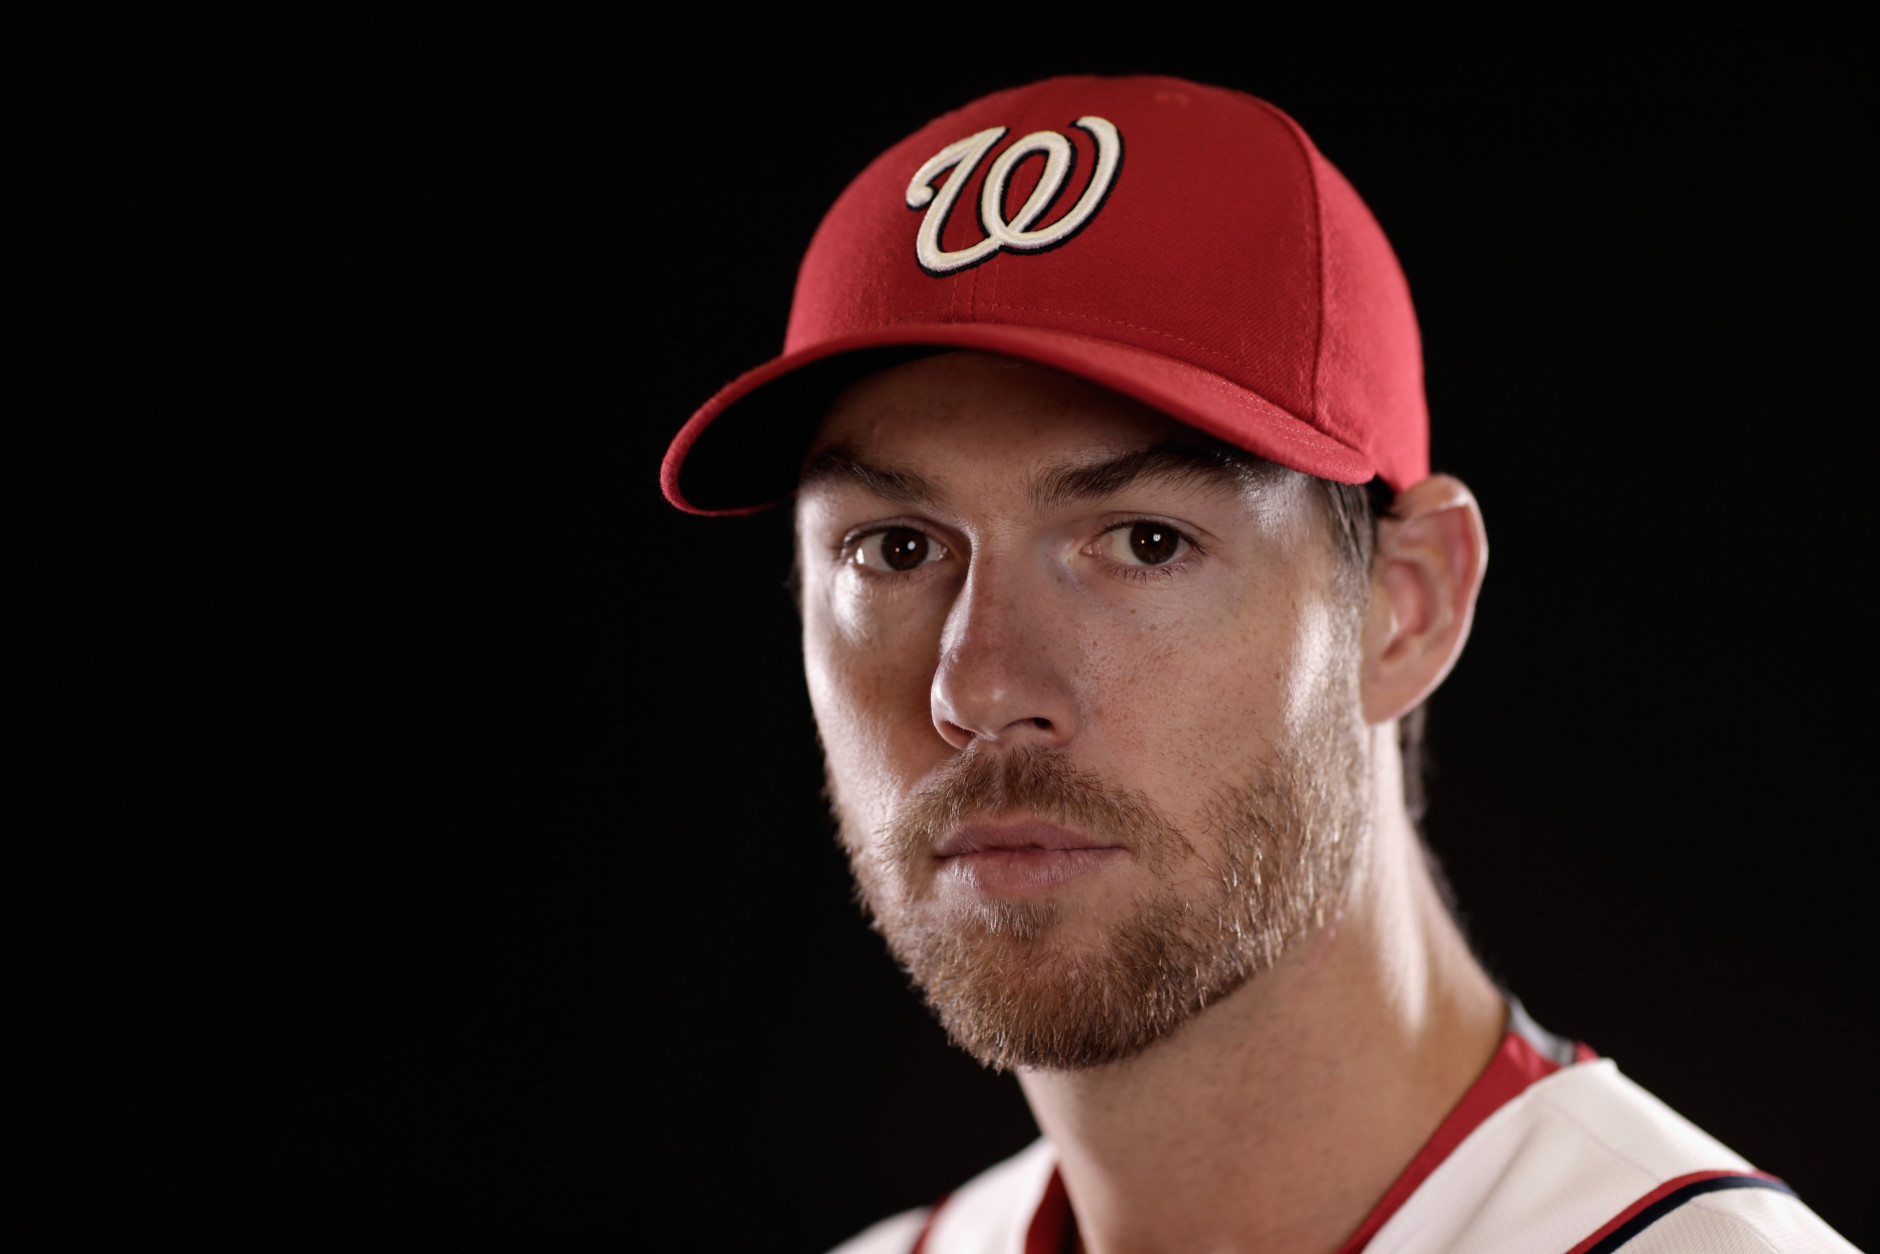 VIERA, FL - MARCH 01:  Doug Fister #58 of the Washington Nationals poses for a portrait during photo day at Space Coast Stadium on March 1, 2015 in Viera, Florida.  (Photo by Chris Trotman/Getty Images)